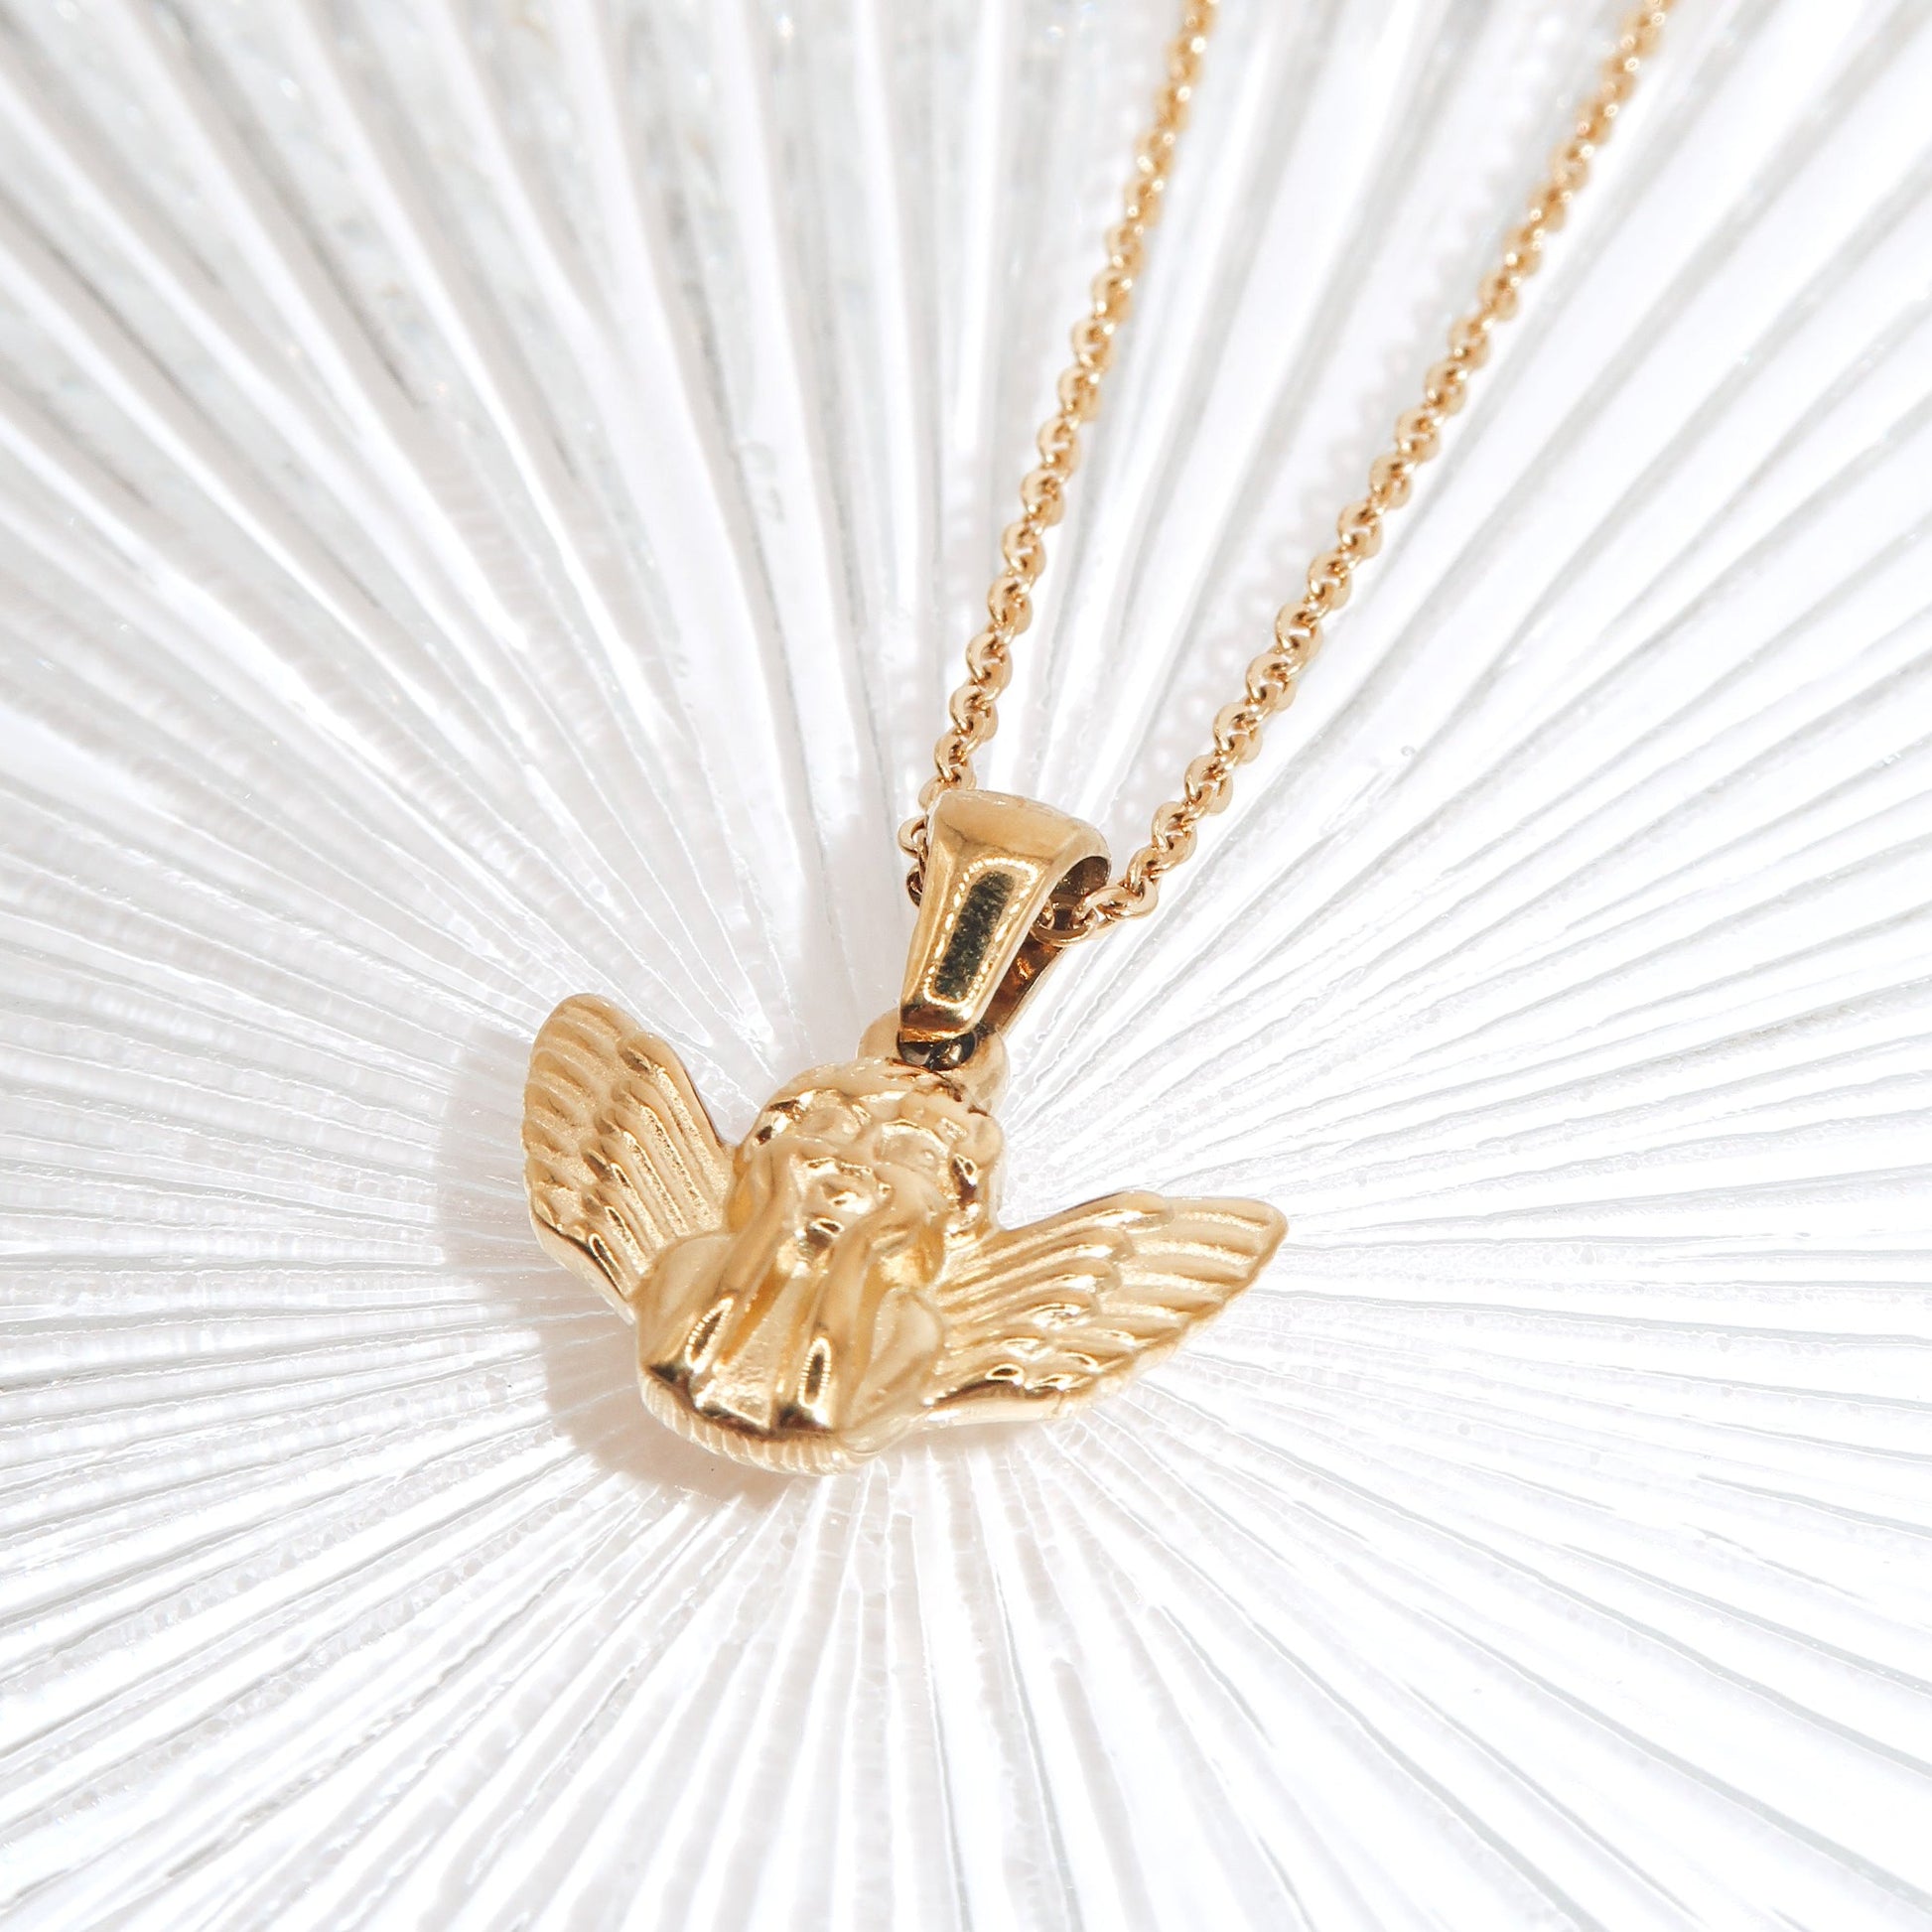 ADELINE - 18K PVD Gold Plated Angel Pendant Necklace - Mixed Metals